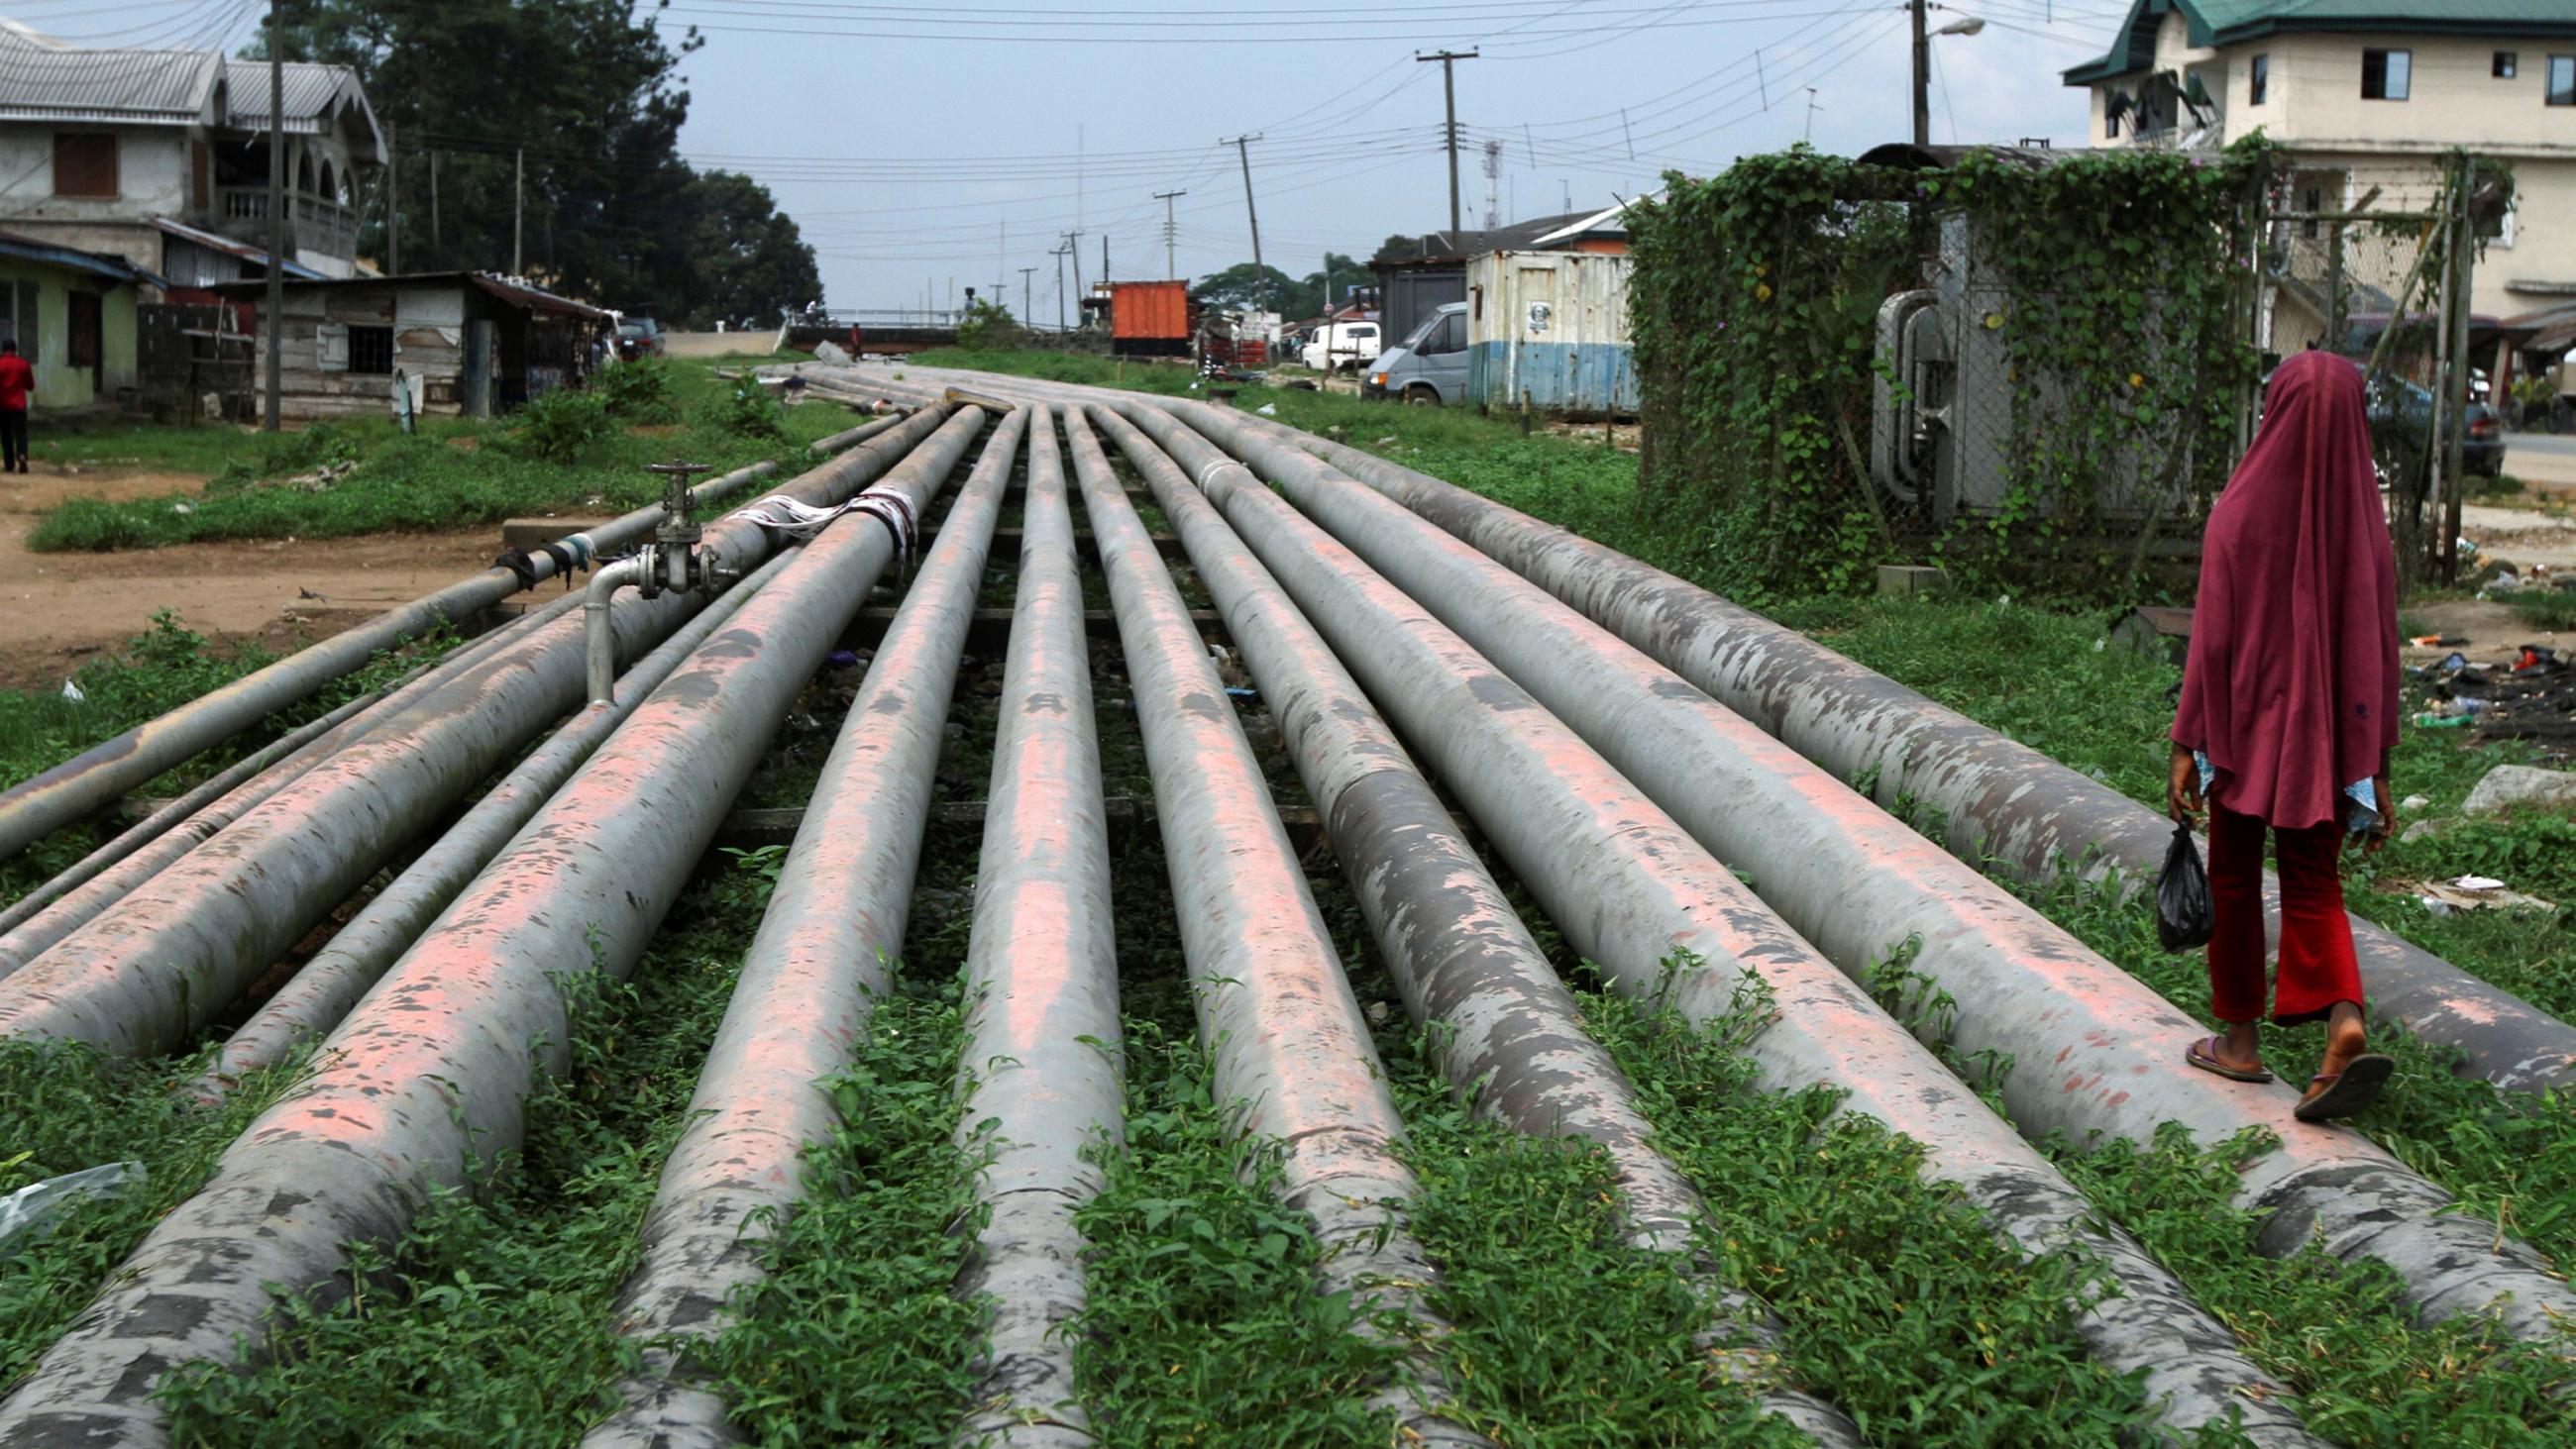  This is a dramatic picture of a dozen or so large pipes, each a couple feet in diameter, running parallel through what appears to be a rural area. The pipes extend off into the distance, forming a natural vanishing point, and a girl wearing red is walking along one of the pipes with her back to the camera.